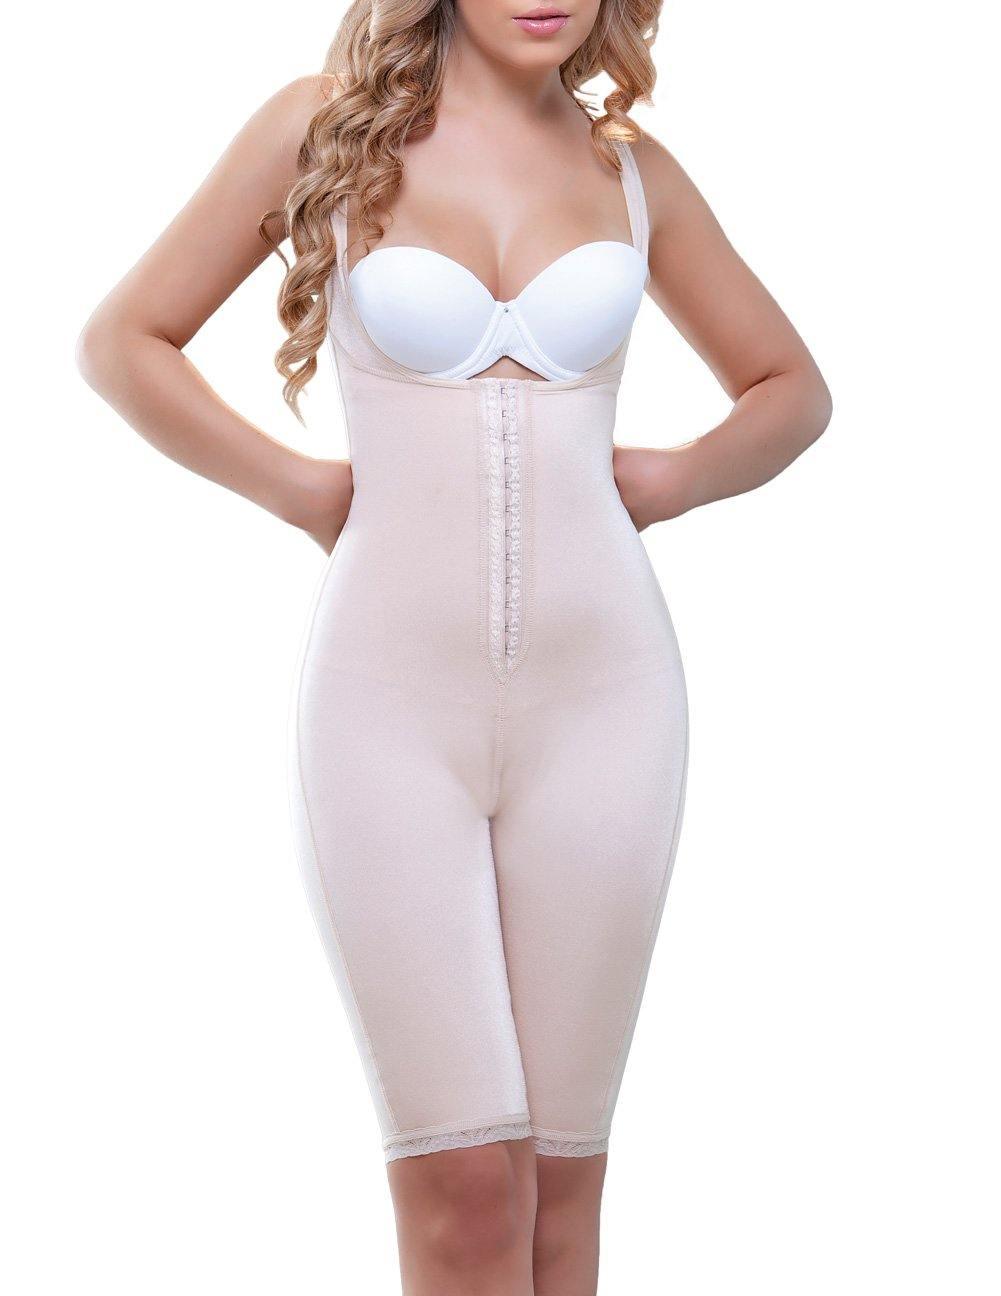 image of product,Full Body Control Suit w/ High Back - {{ SEXYEONE }}